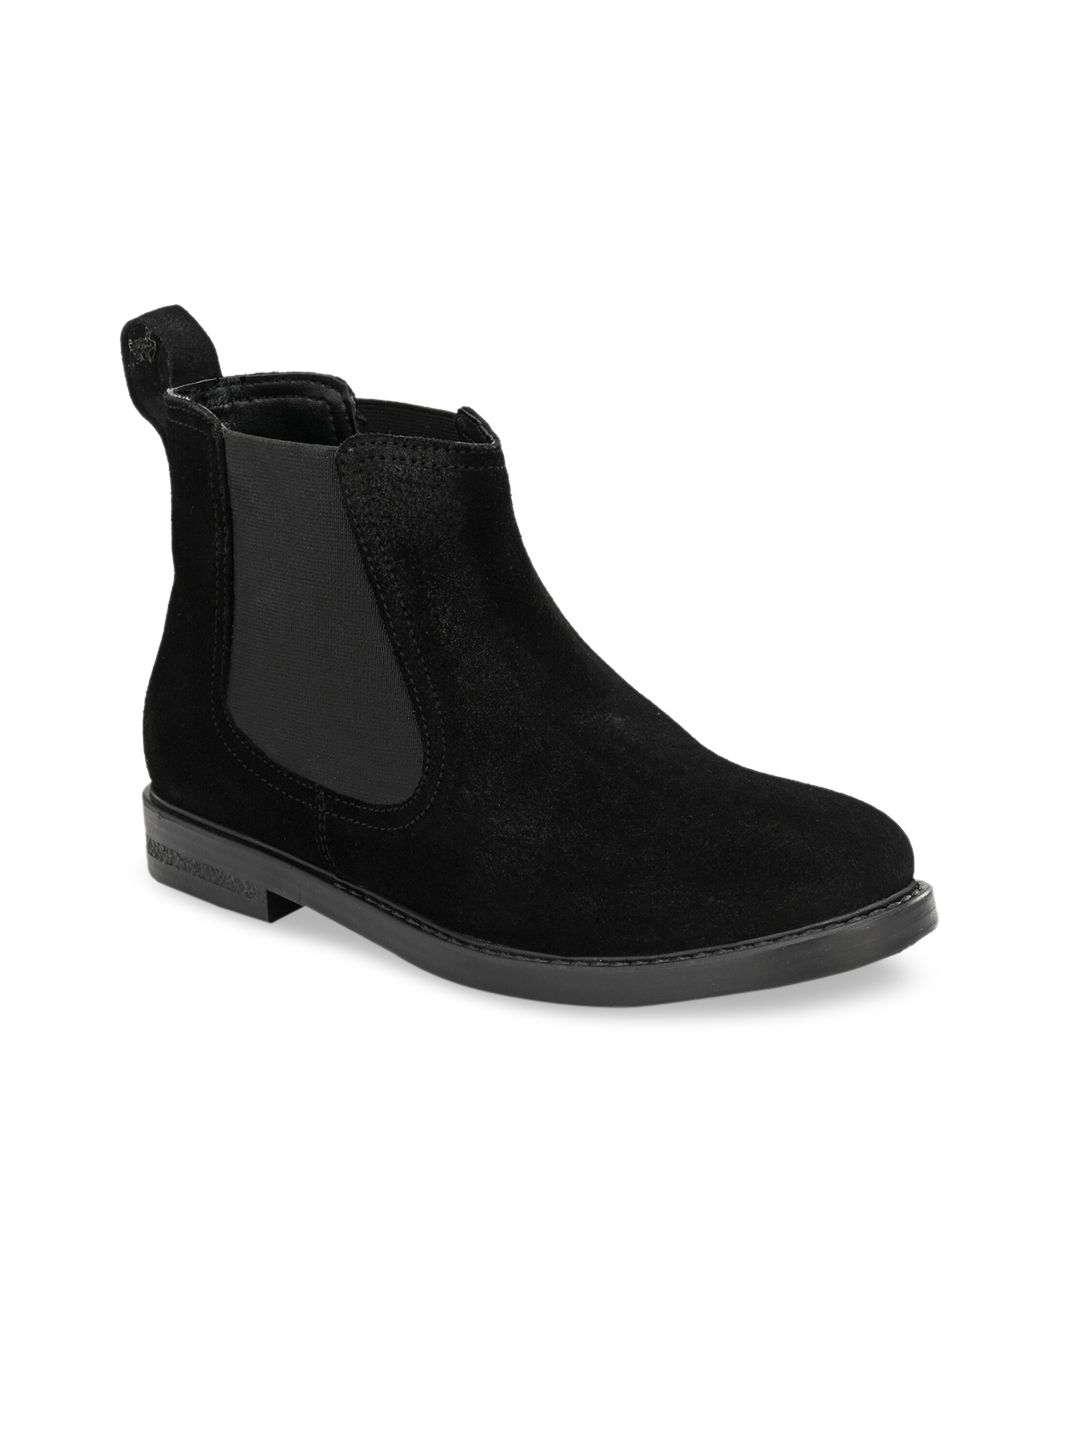 CARLO ROMANO Women Black Solid Suede High-Top Flat Boots Price in India